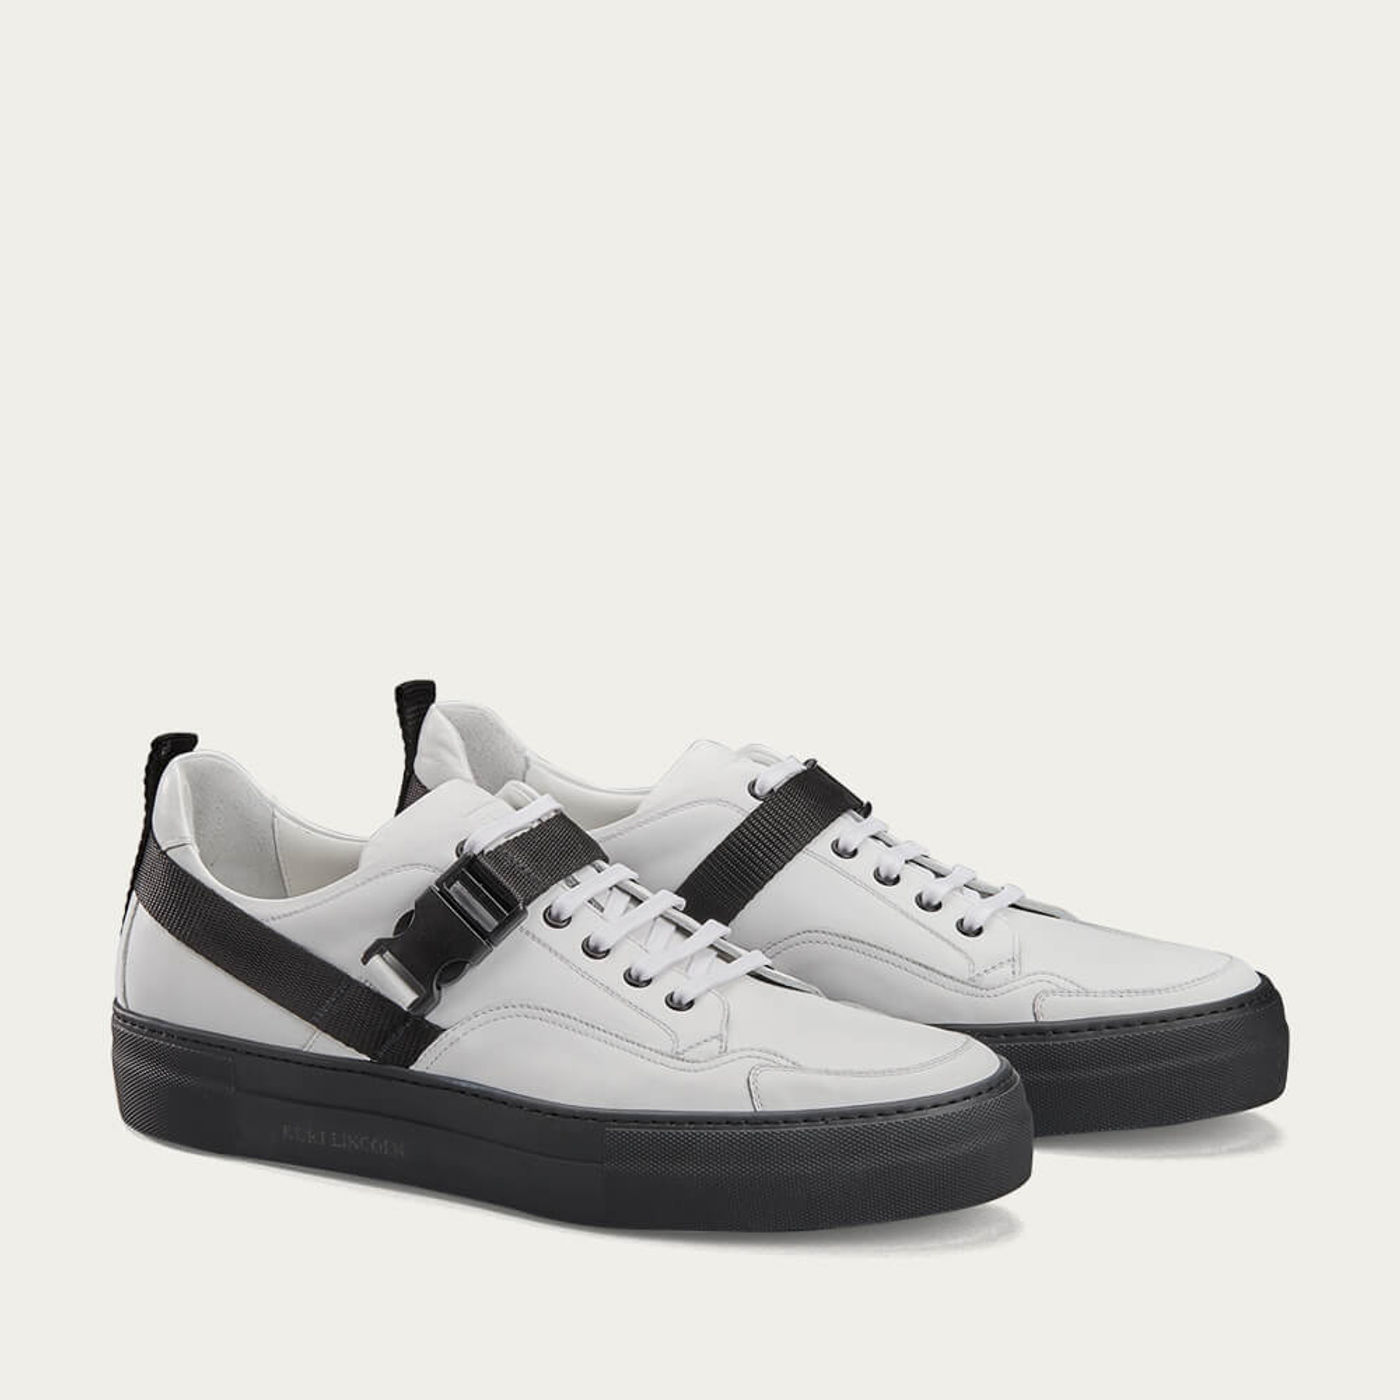 White and Black Low Top Sneakers With Strap | Bombinate